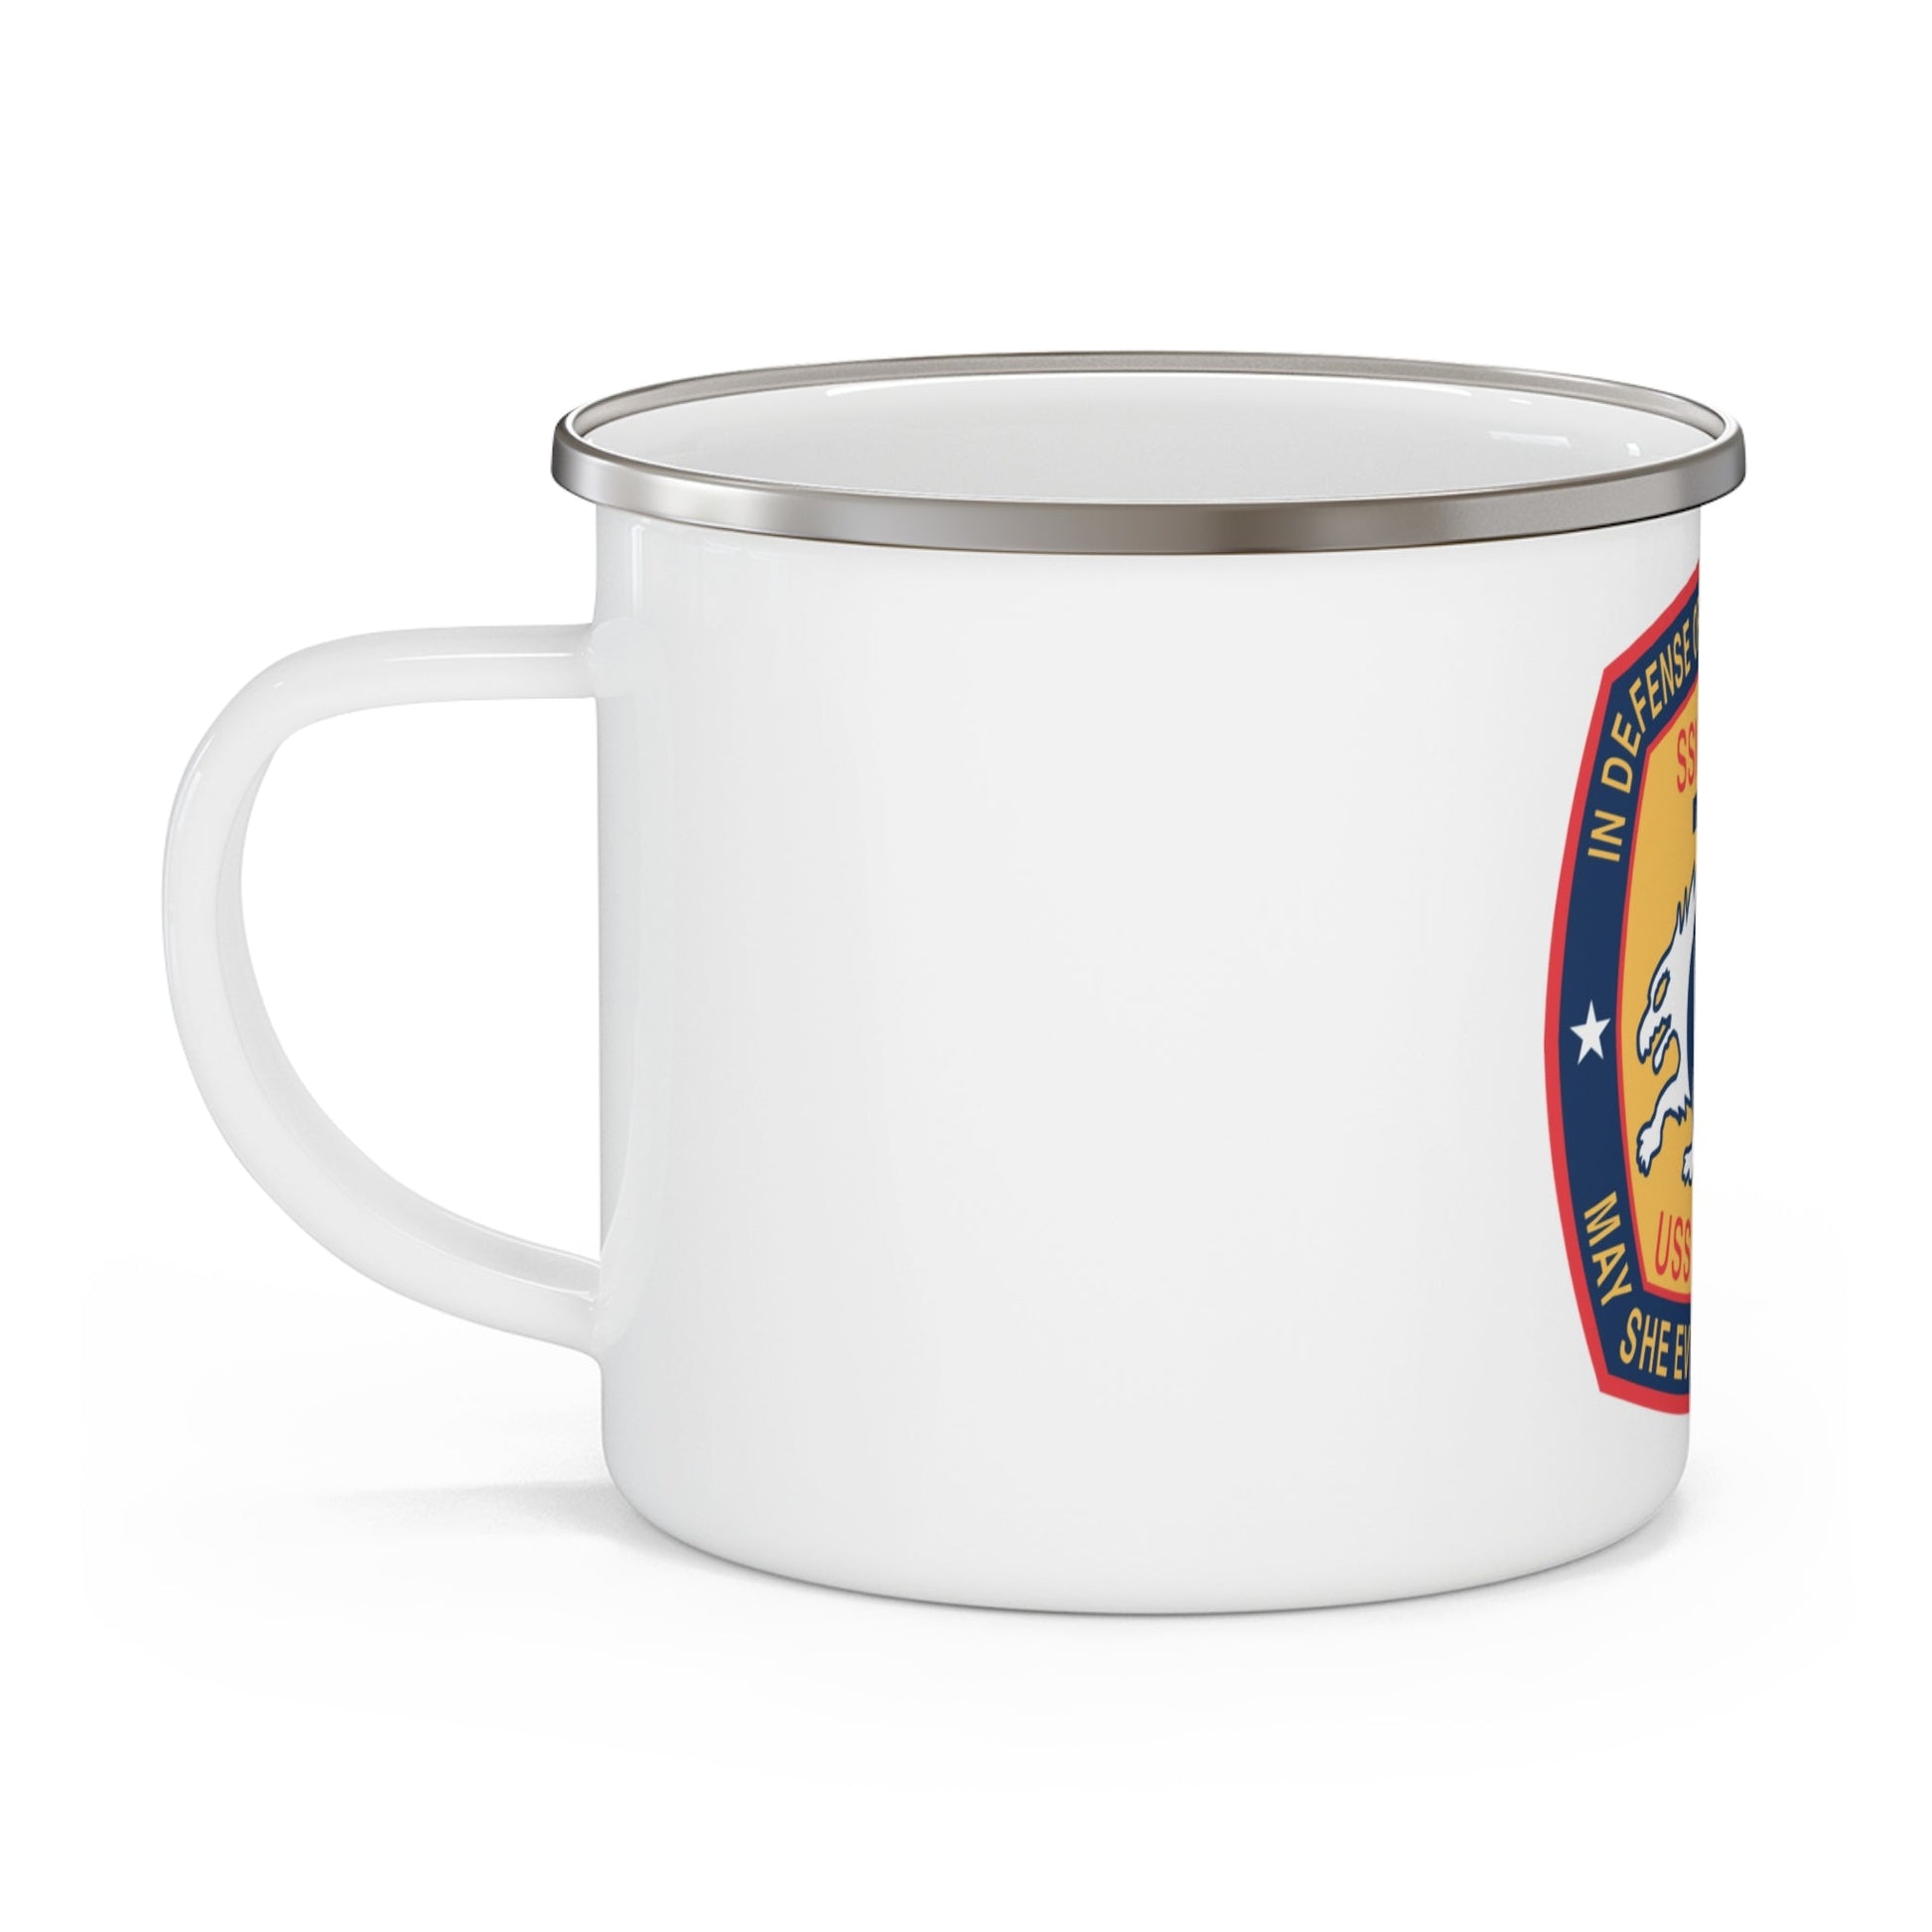 USS Memphis SSN 691 In Defence of the Human Freedom (U.S. Navy) Enamel Mug 12oz-12oz-The Sticker Space